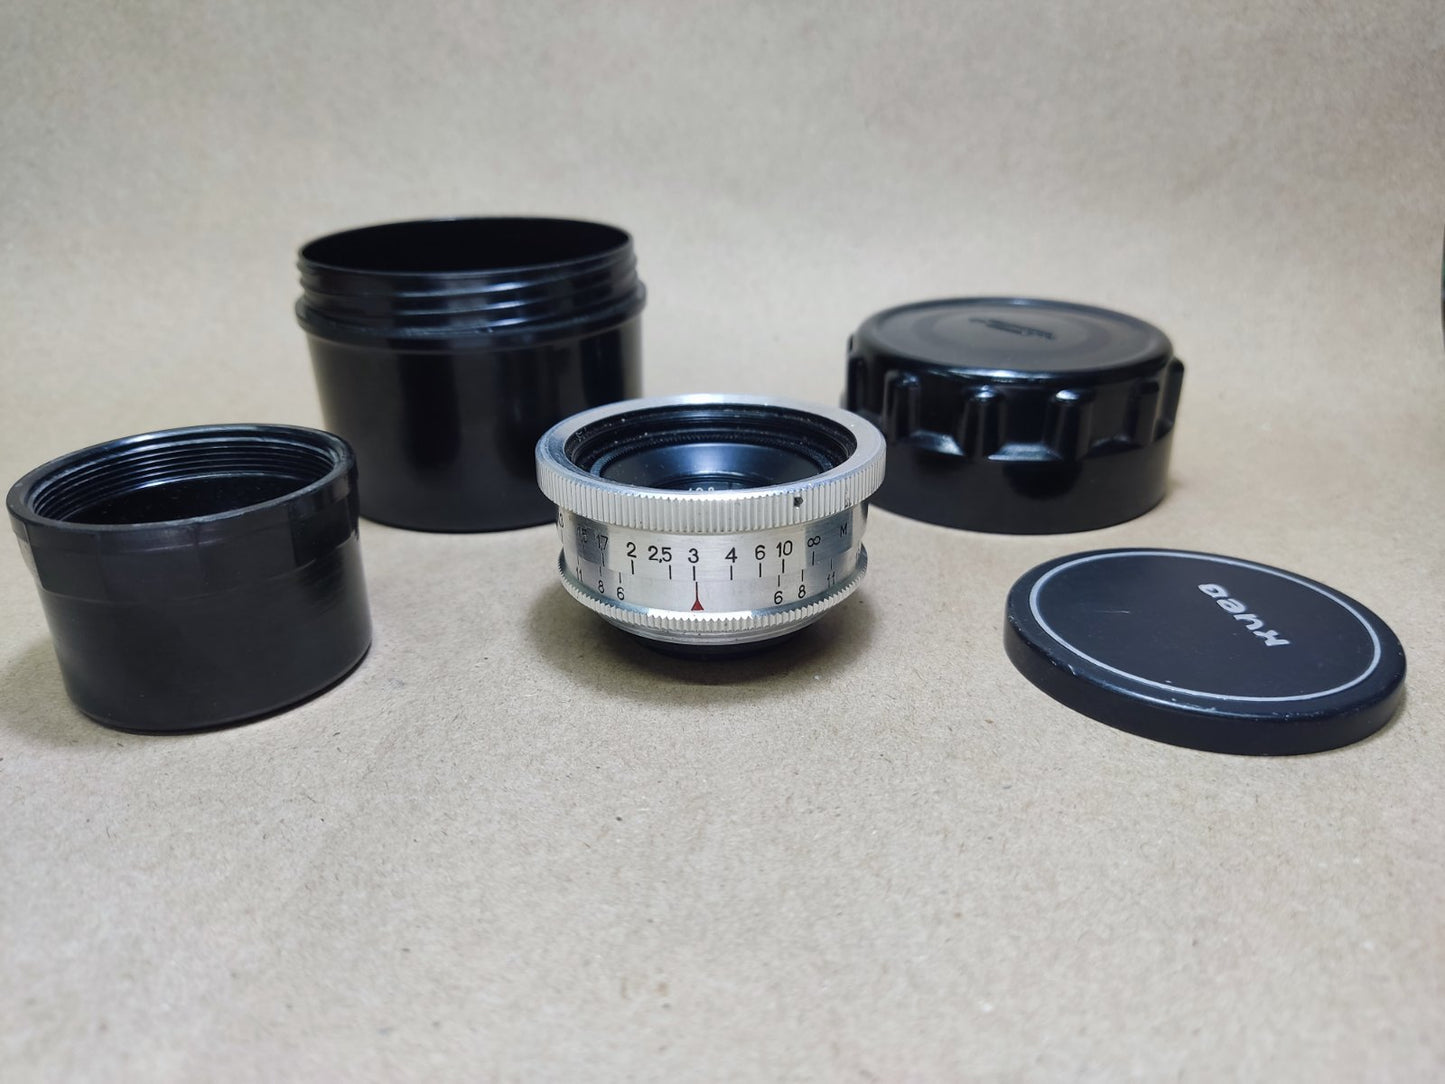 Very rare Orion-15 28mm f/6 wide angle Lens For LTM M39 Leica RF Mount